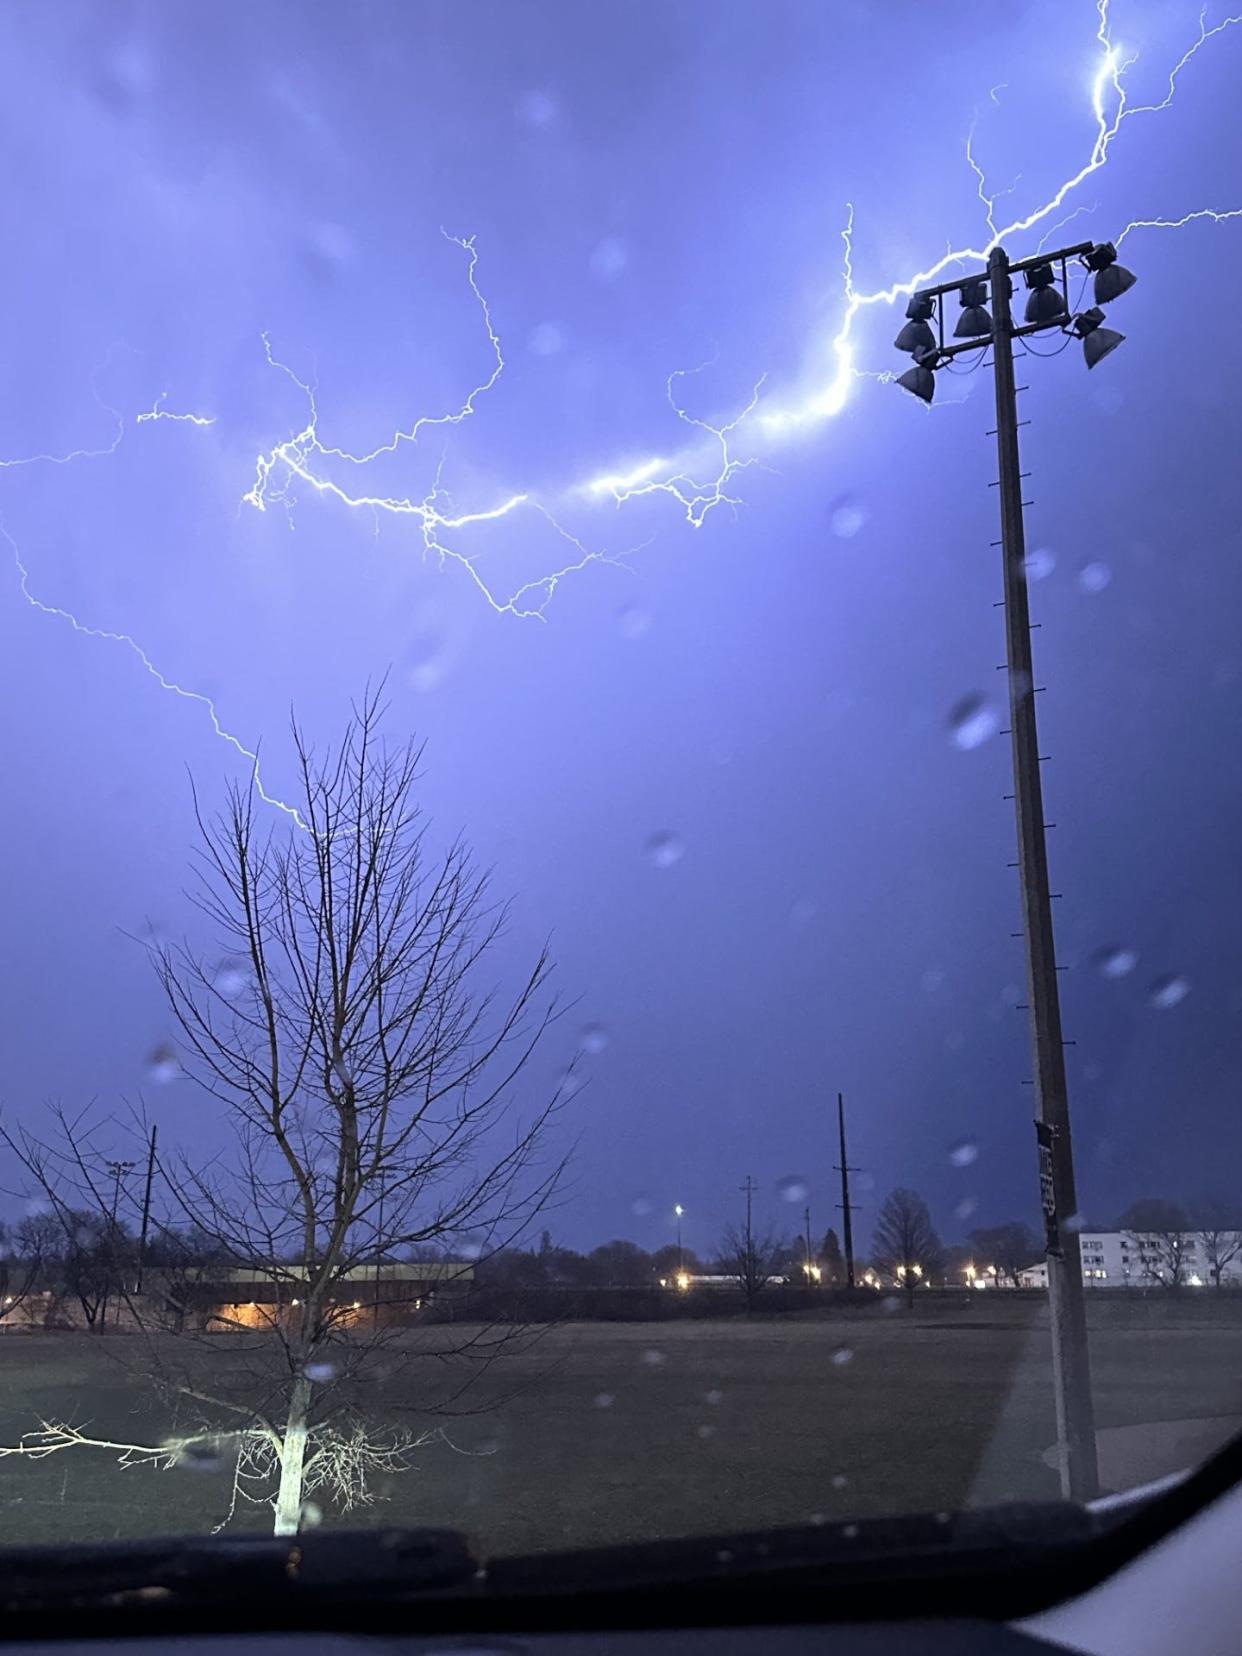 Thursday night's storm generated this lighting bolt over Sijan field in Bay View.